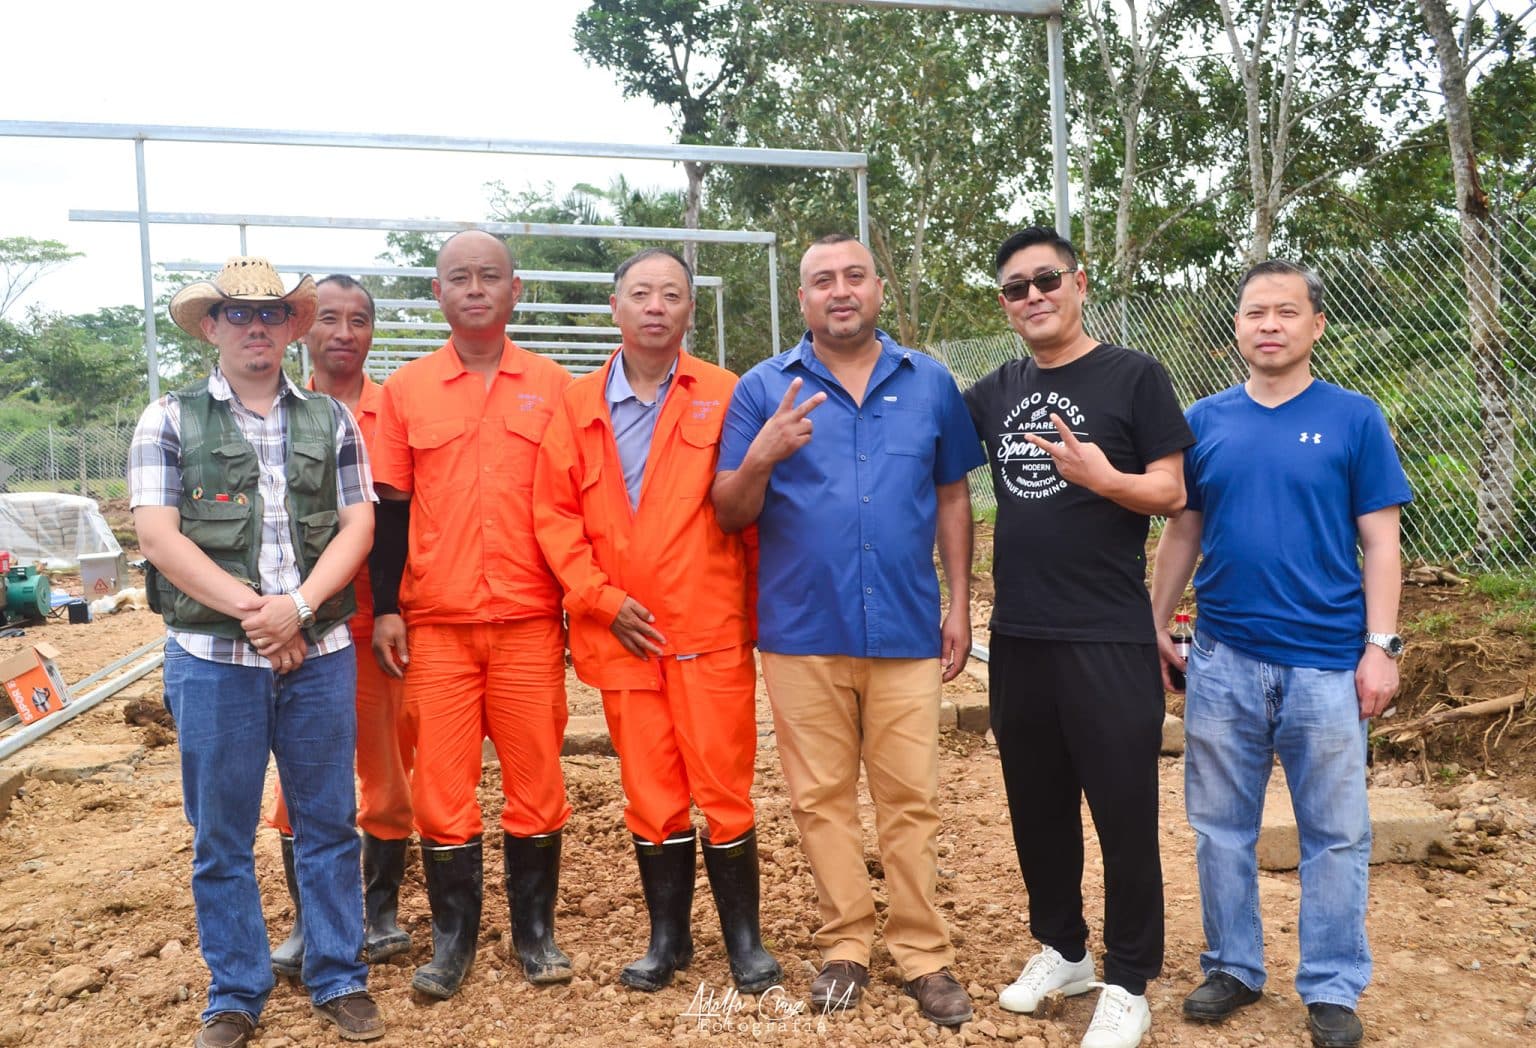 Erlin Jose Valdivia, mayor of Mulukuku, together with representatives of the Chinese company XinXin Linze. Photo from the Mulukuku mayor’s office.